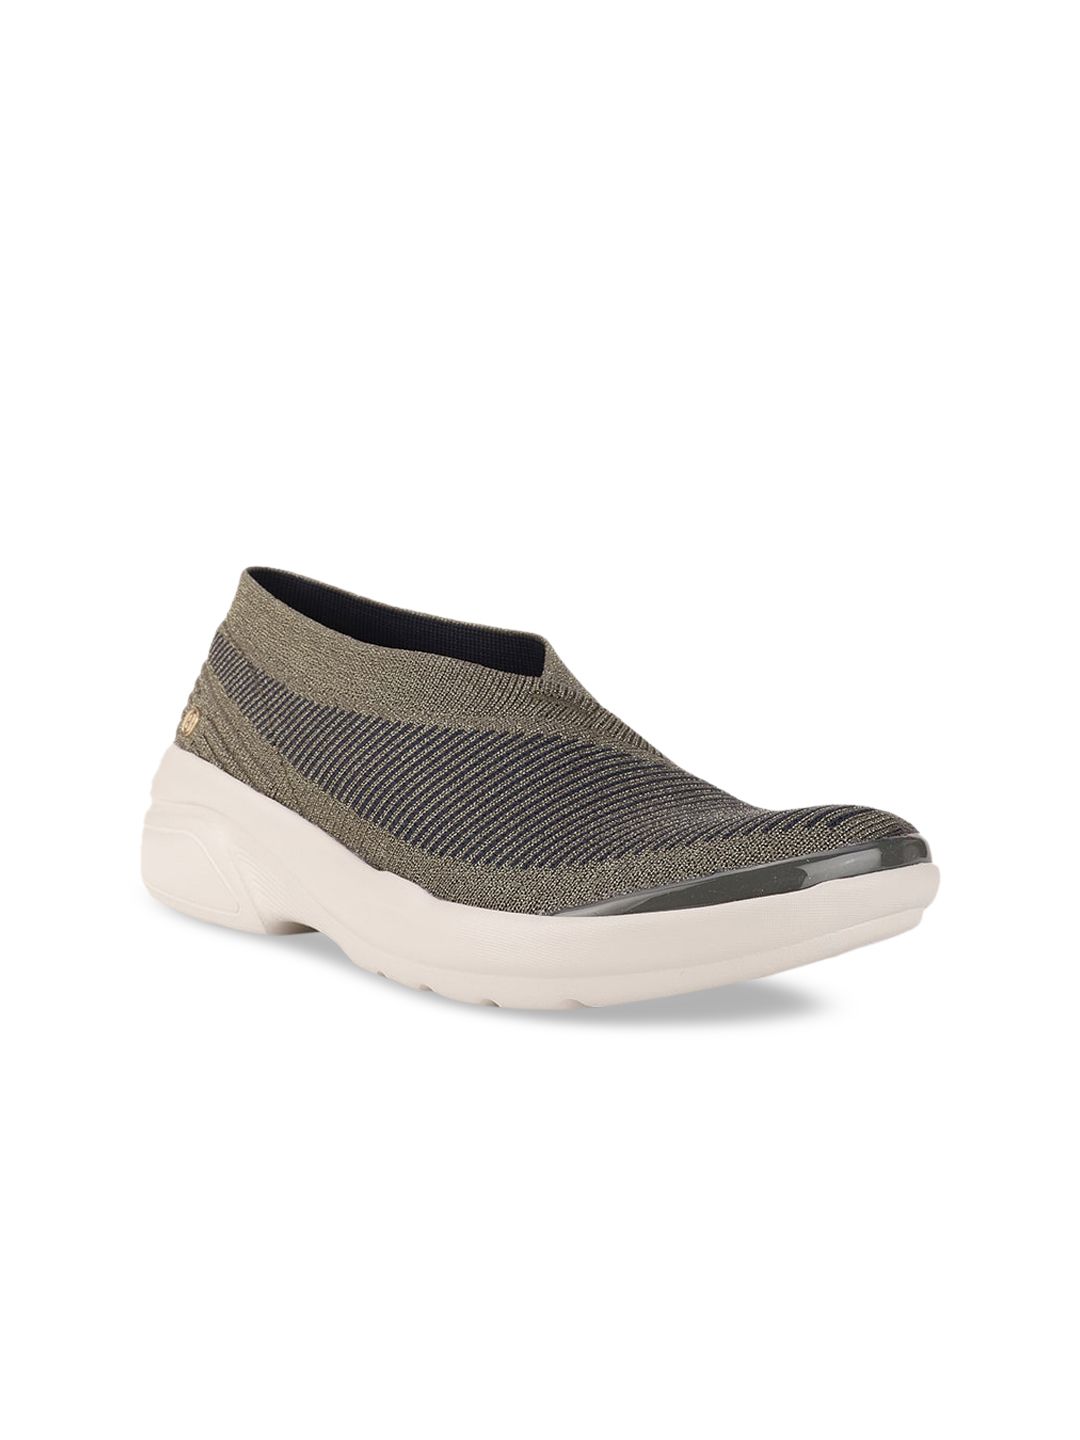 Naturalizer Women Olive Green Woven Design Slip-On Sneakers Price in India